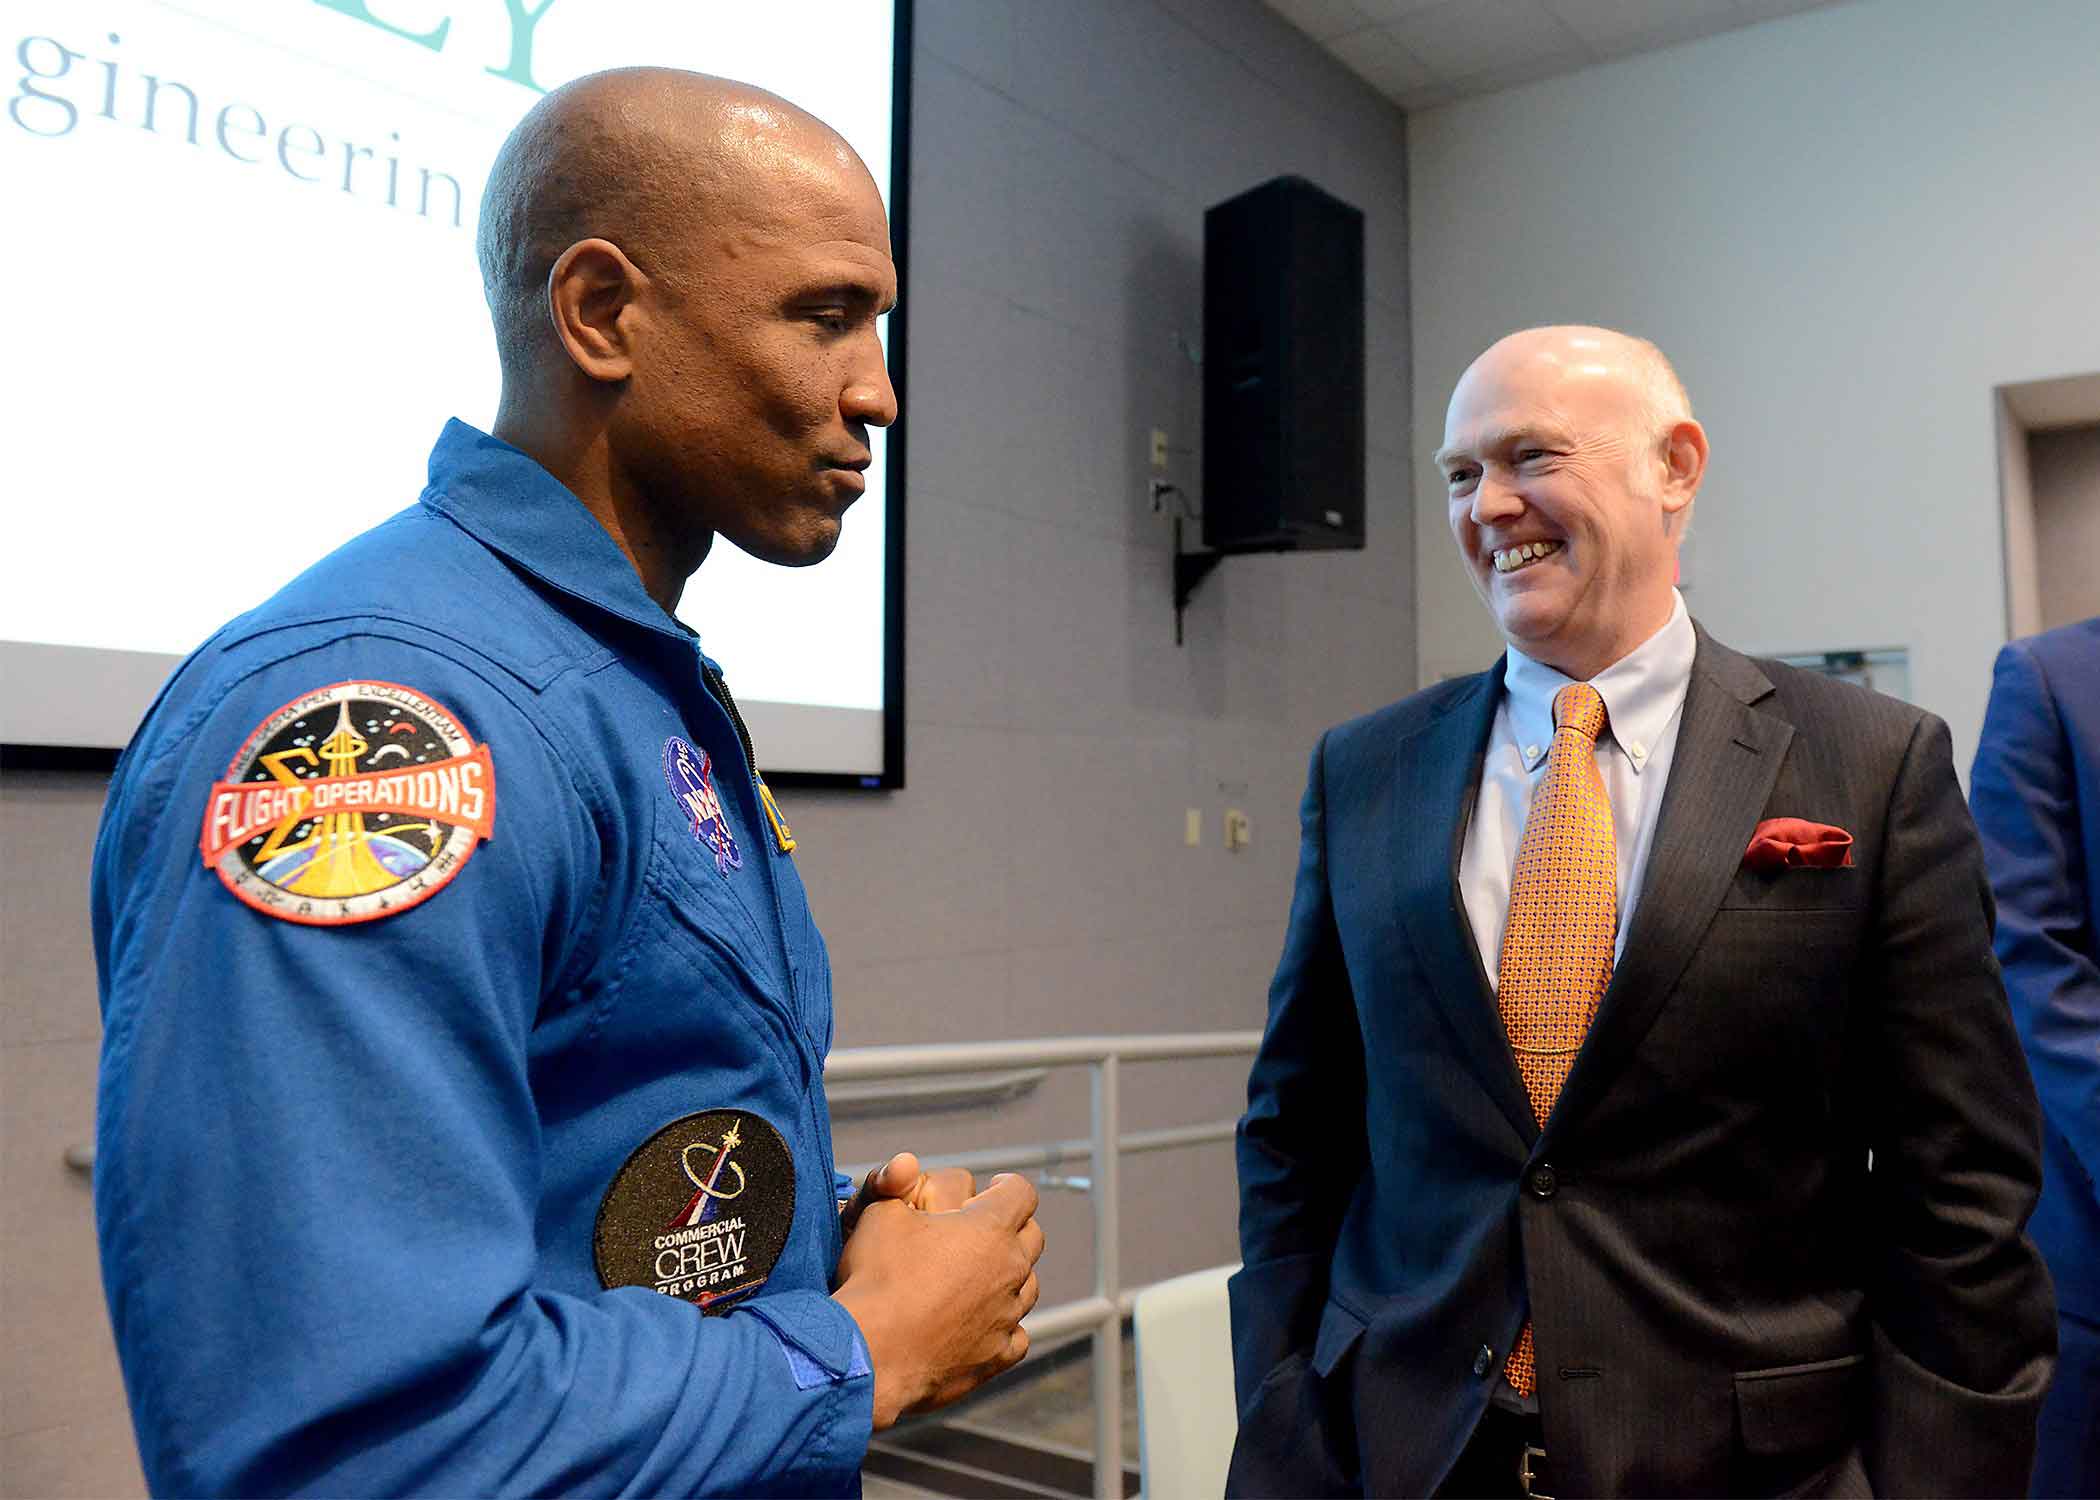 NASA astronaut Victor Glover and United Launch Alliance CEO Tory Bruno chat during a recent trip to Cal Poly, which named them 2018 Honored Alumni.